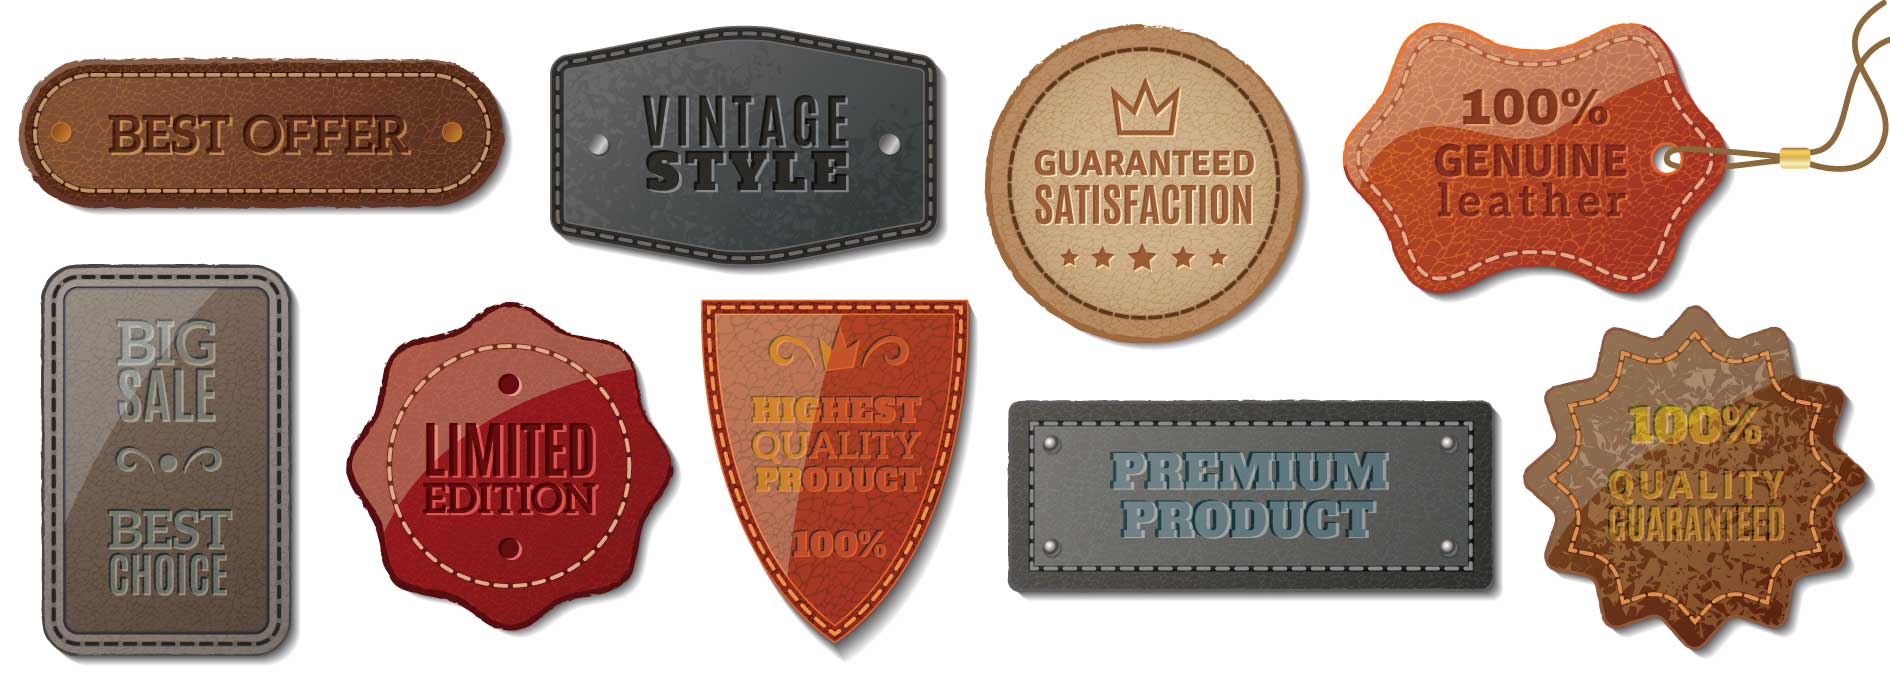 Leather labels and leather patches can be customized in any shape.